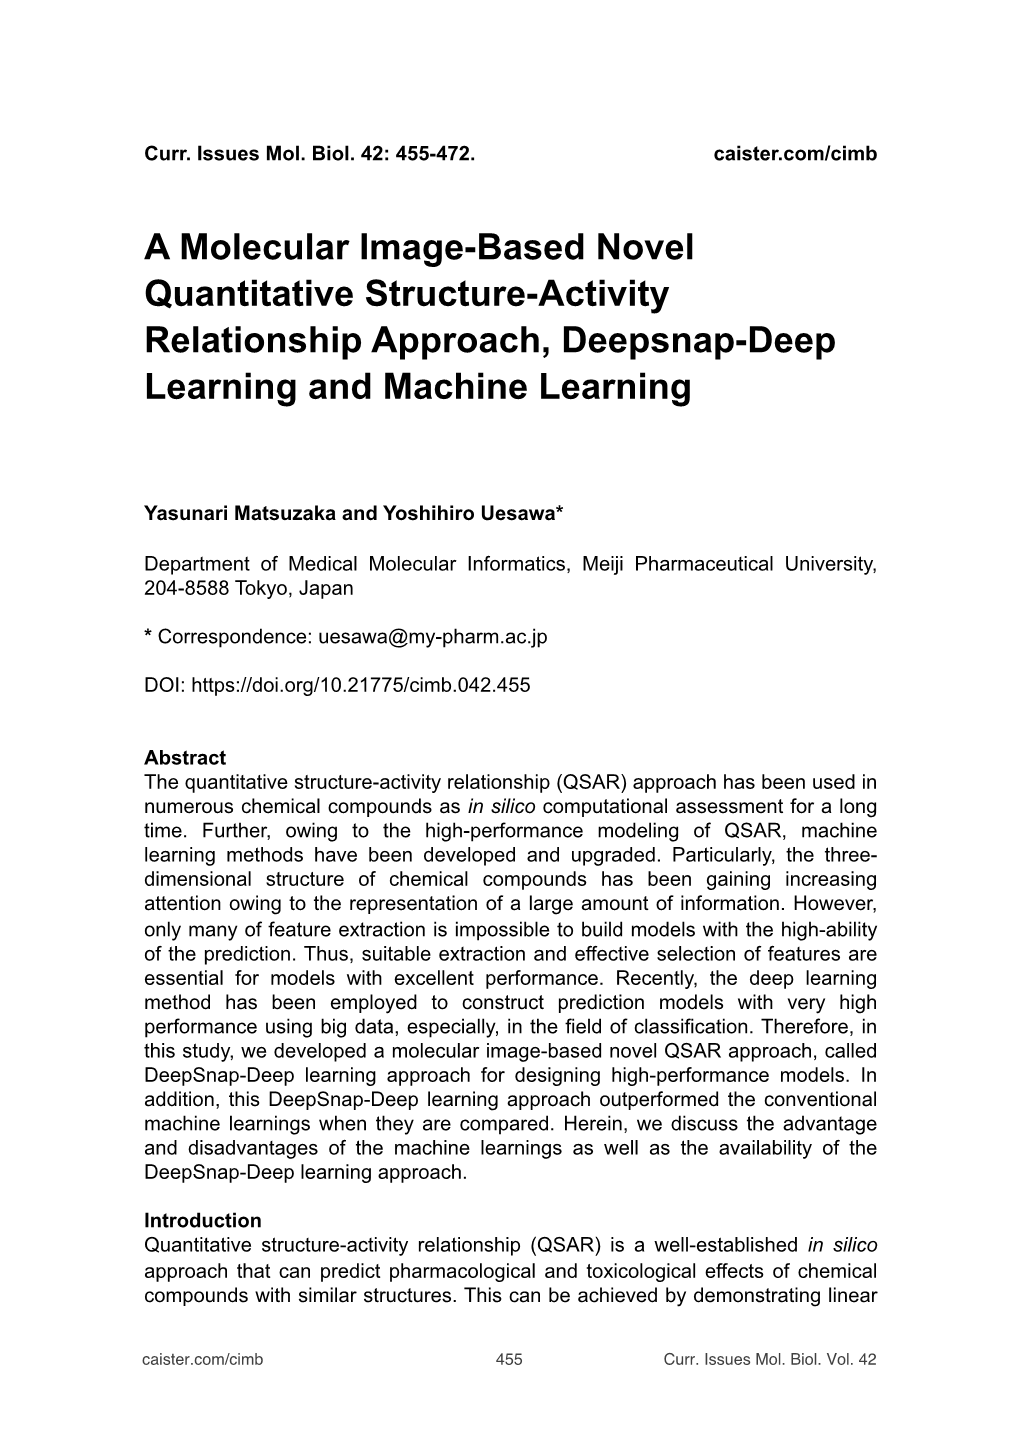 A Molecular Image-Based Novel Quantitative Structure-Activity Relationship Approach, Deepsnap-Deep Learning and Machine Learning